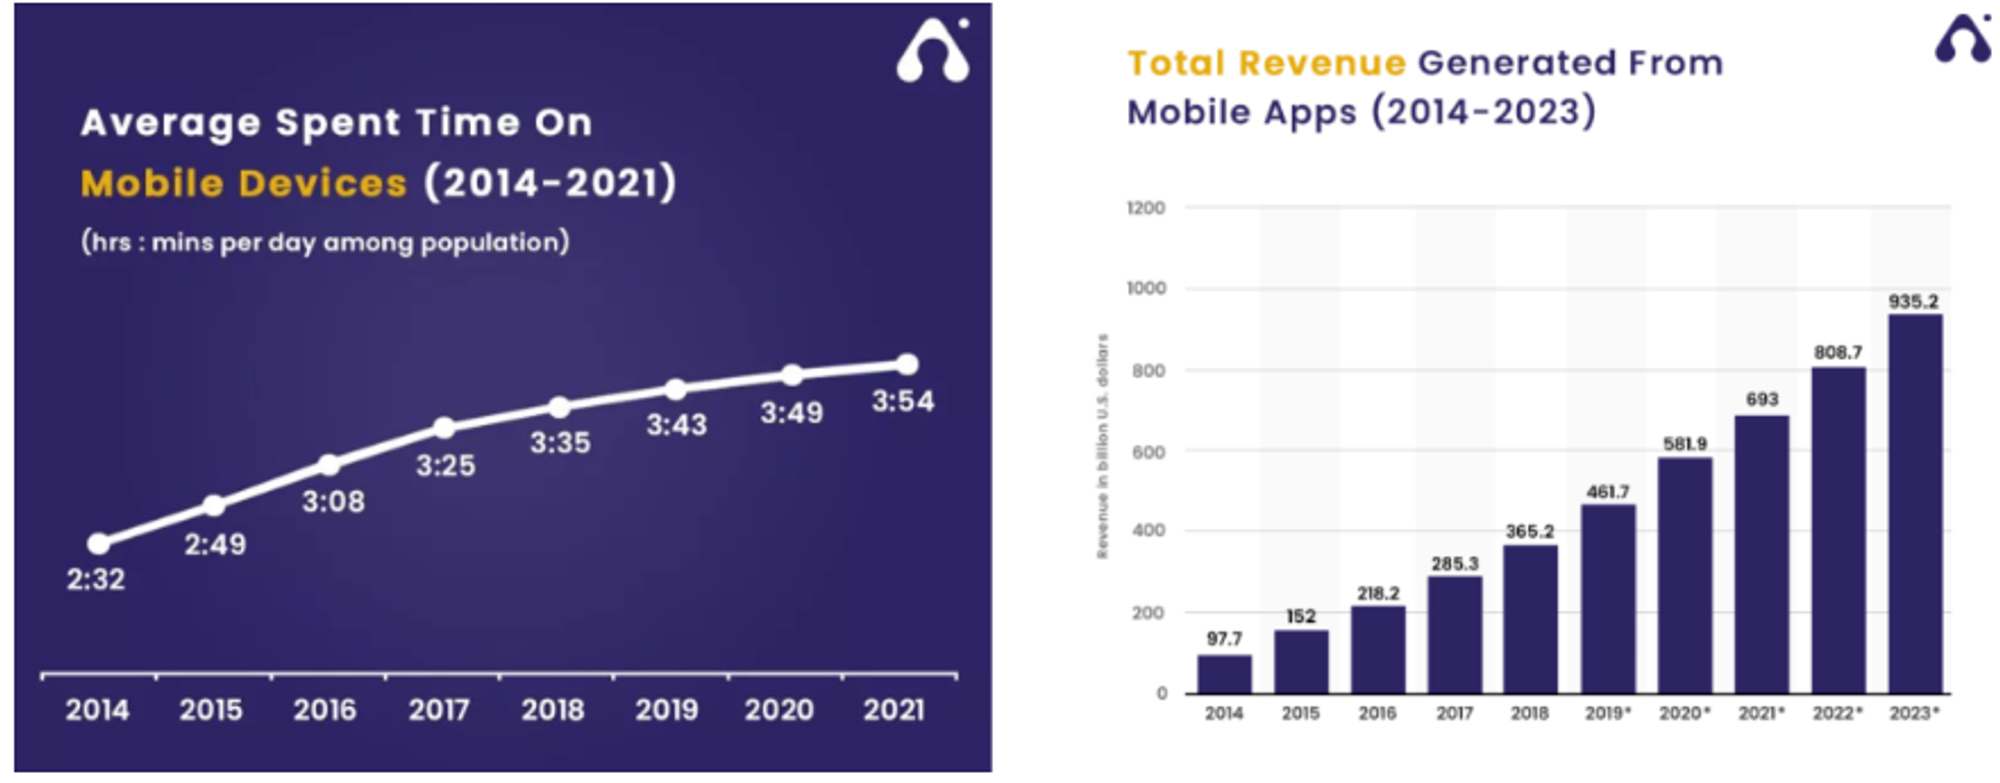 Time spent on mobile devices and mobile app revenue is growing. Source: Appventurez